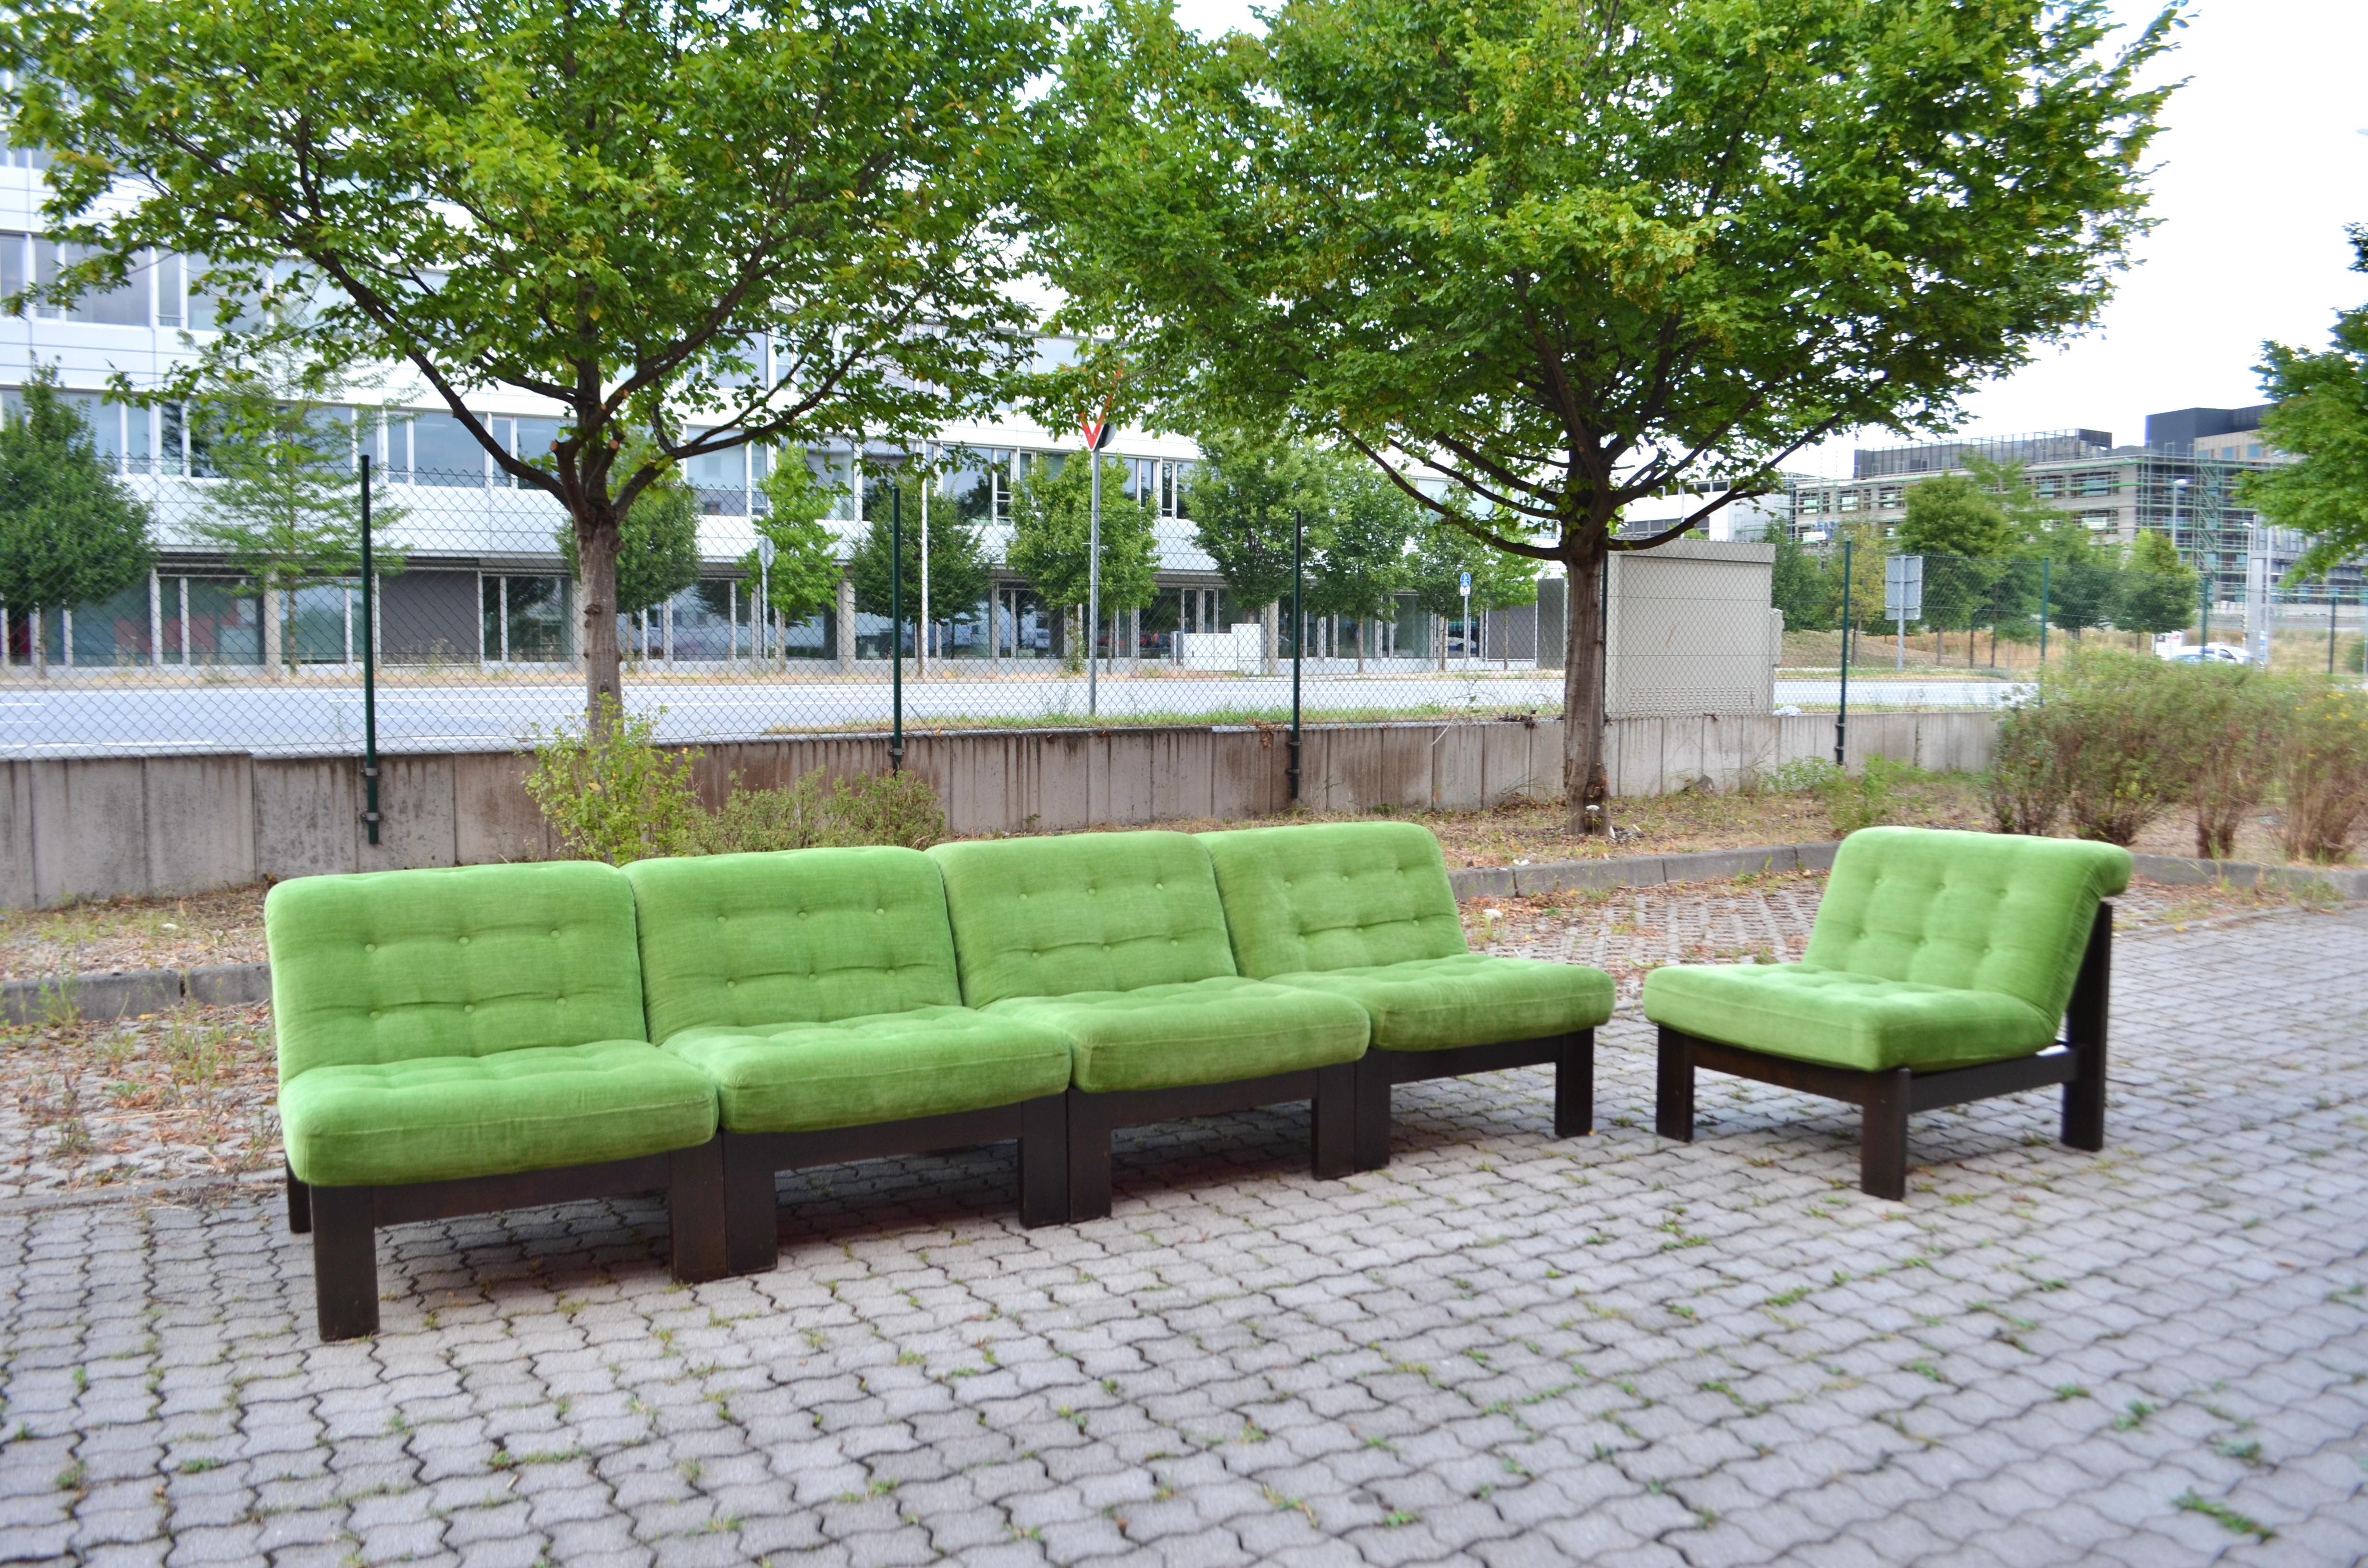 Vintage Modular limegreen Mohair Living Room Suite Sectional Sofa Germany In Good Condition For Sale In Munich, Bavaria